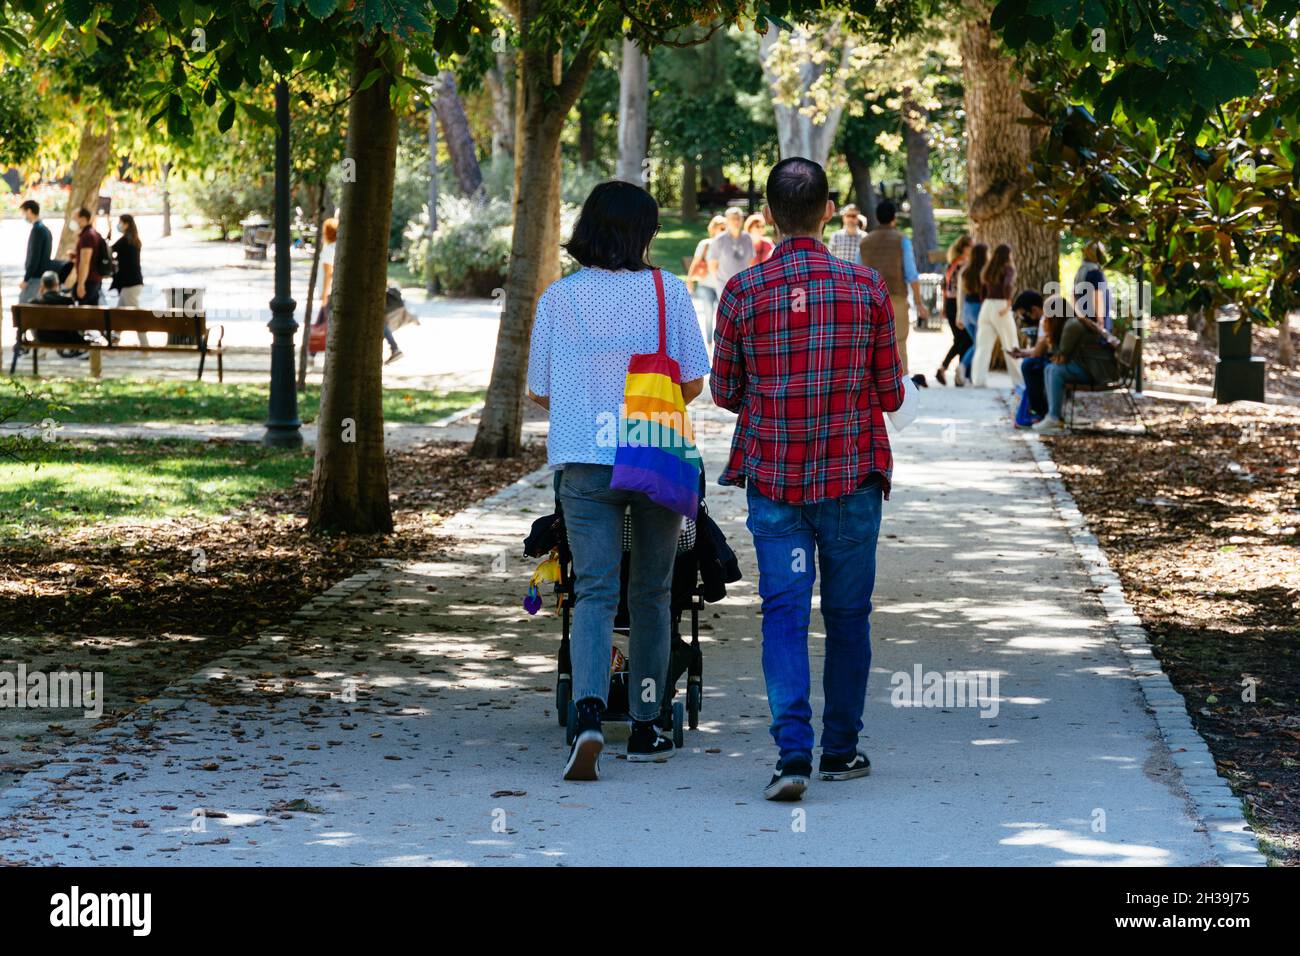 Madrid, Spain - September 26, 2021: Young couple walking with a baby stroller in the retiro park in Madrid. She carries a bag with gay pride colors. Stock Photo